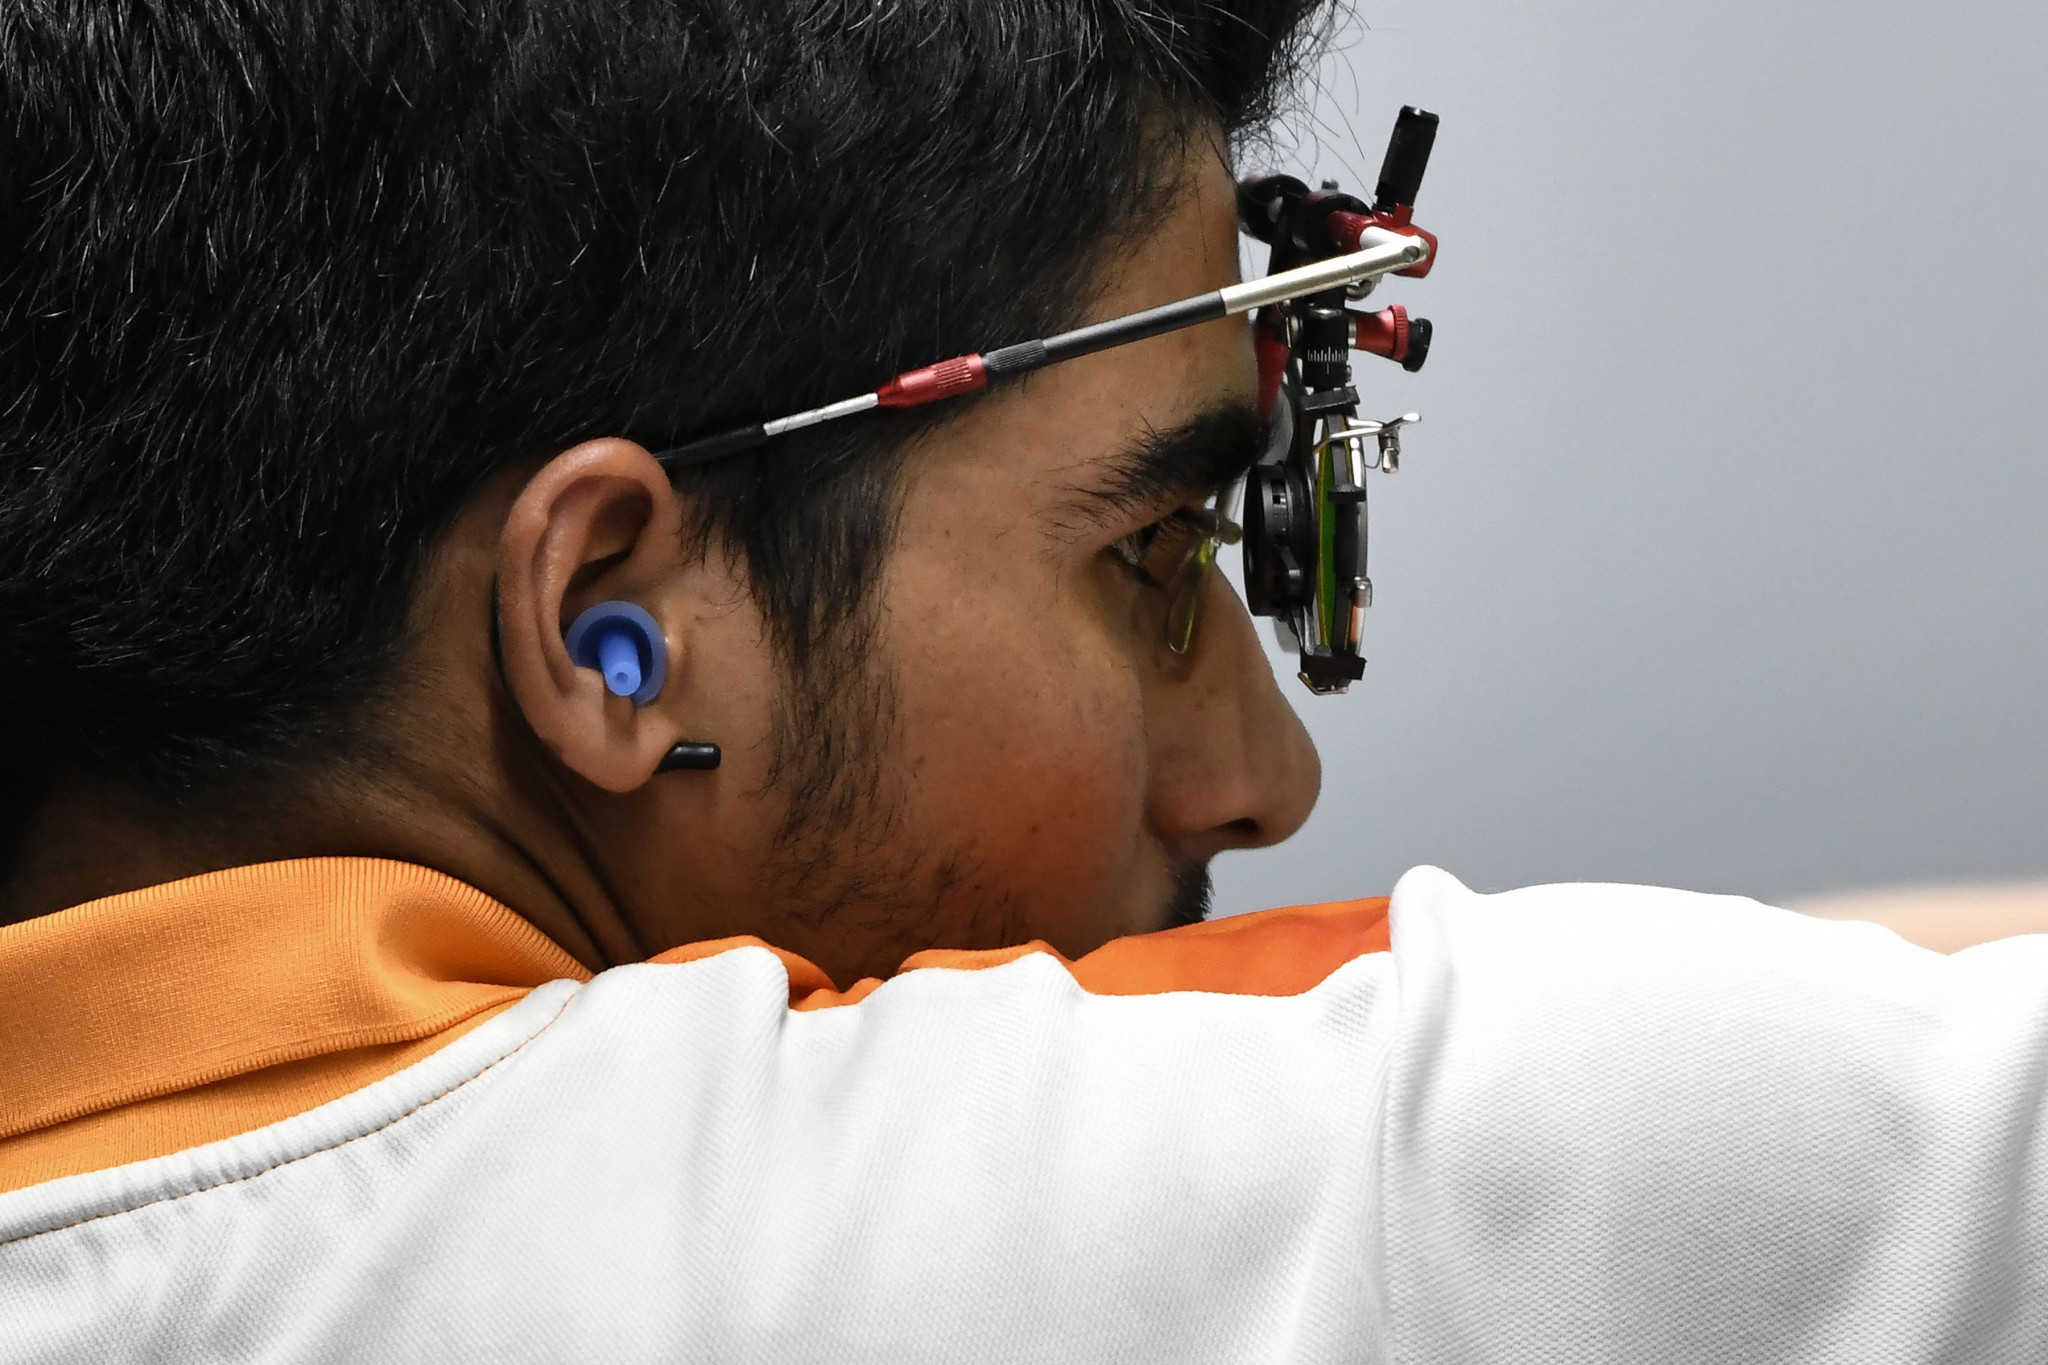 Chaudhary breaks world record at ISSF Rifle and Pistol World Cup